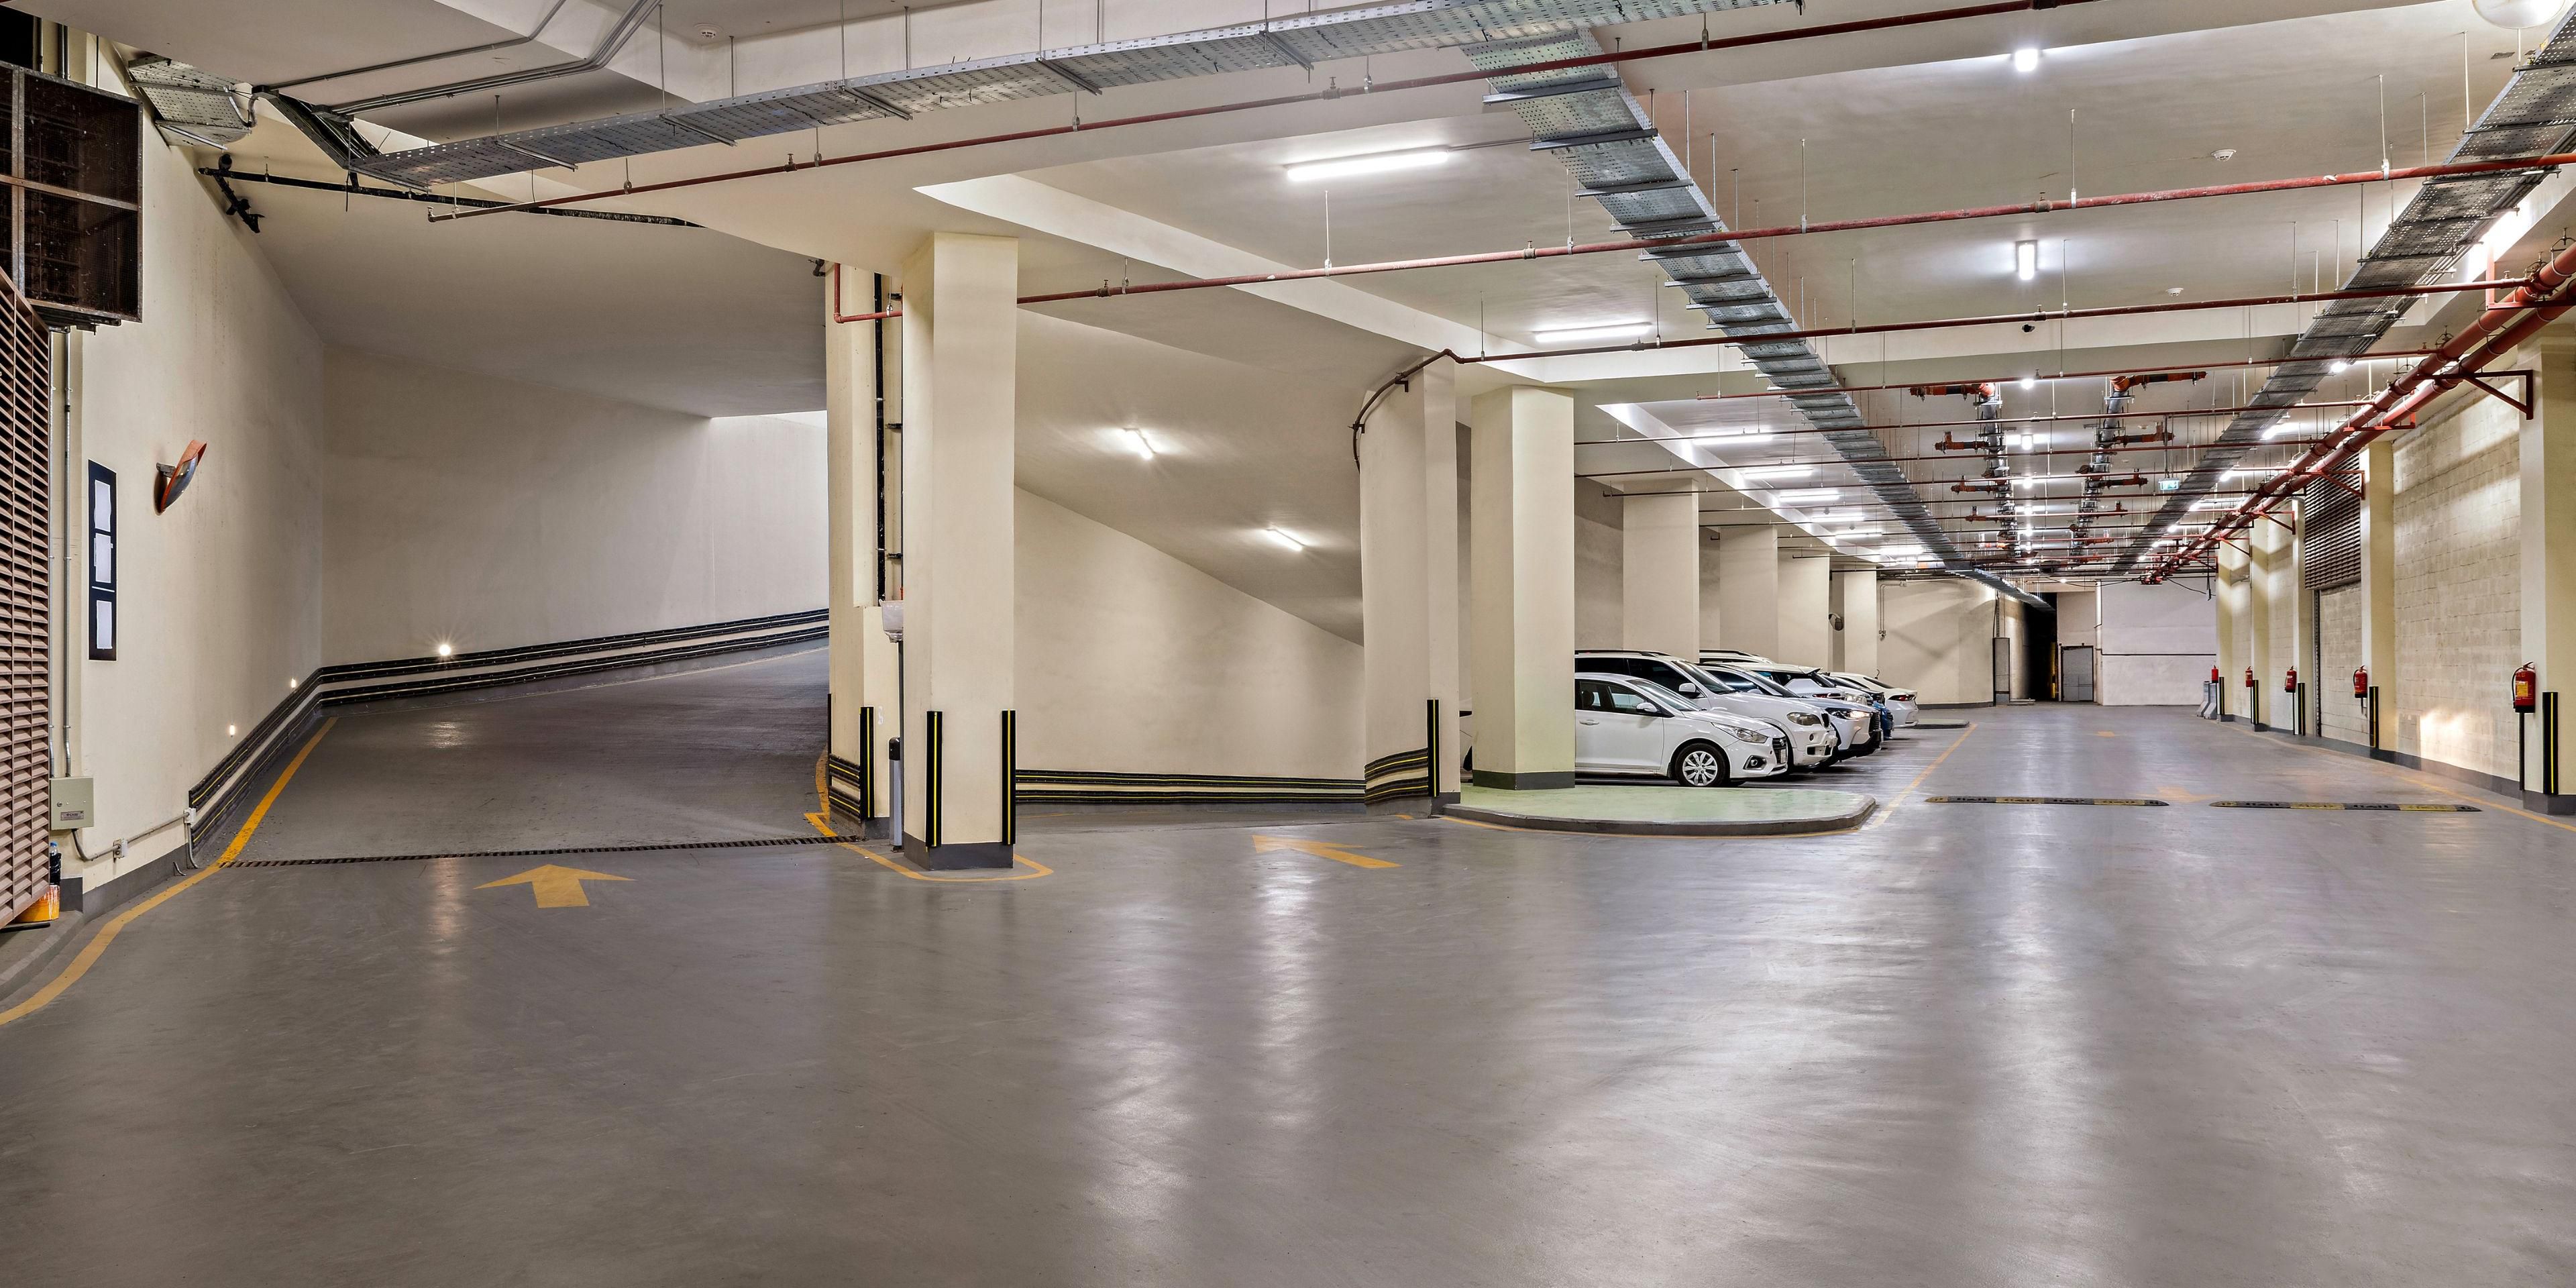 Our hotel parking is on levels 2 and 3 of the basement. We want to keep you in the loop: seasonal parking demands may affect the availability and price of our parking spots. But don't fret - we'll always do our best to make sure you can park your wheels.